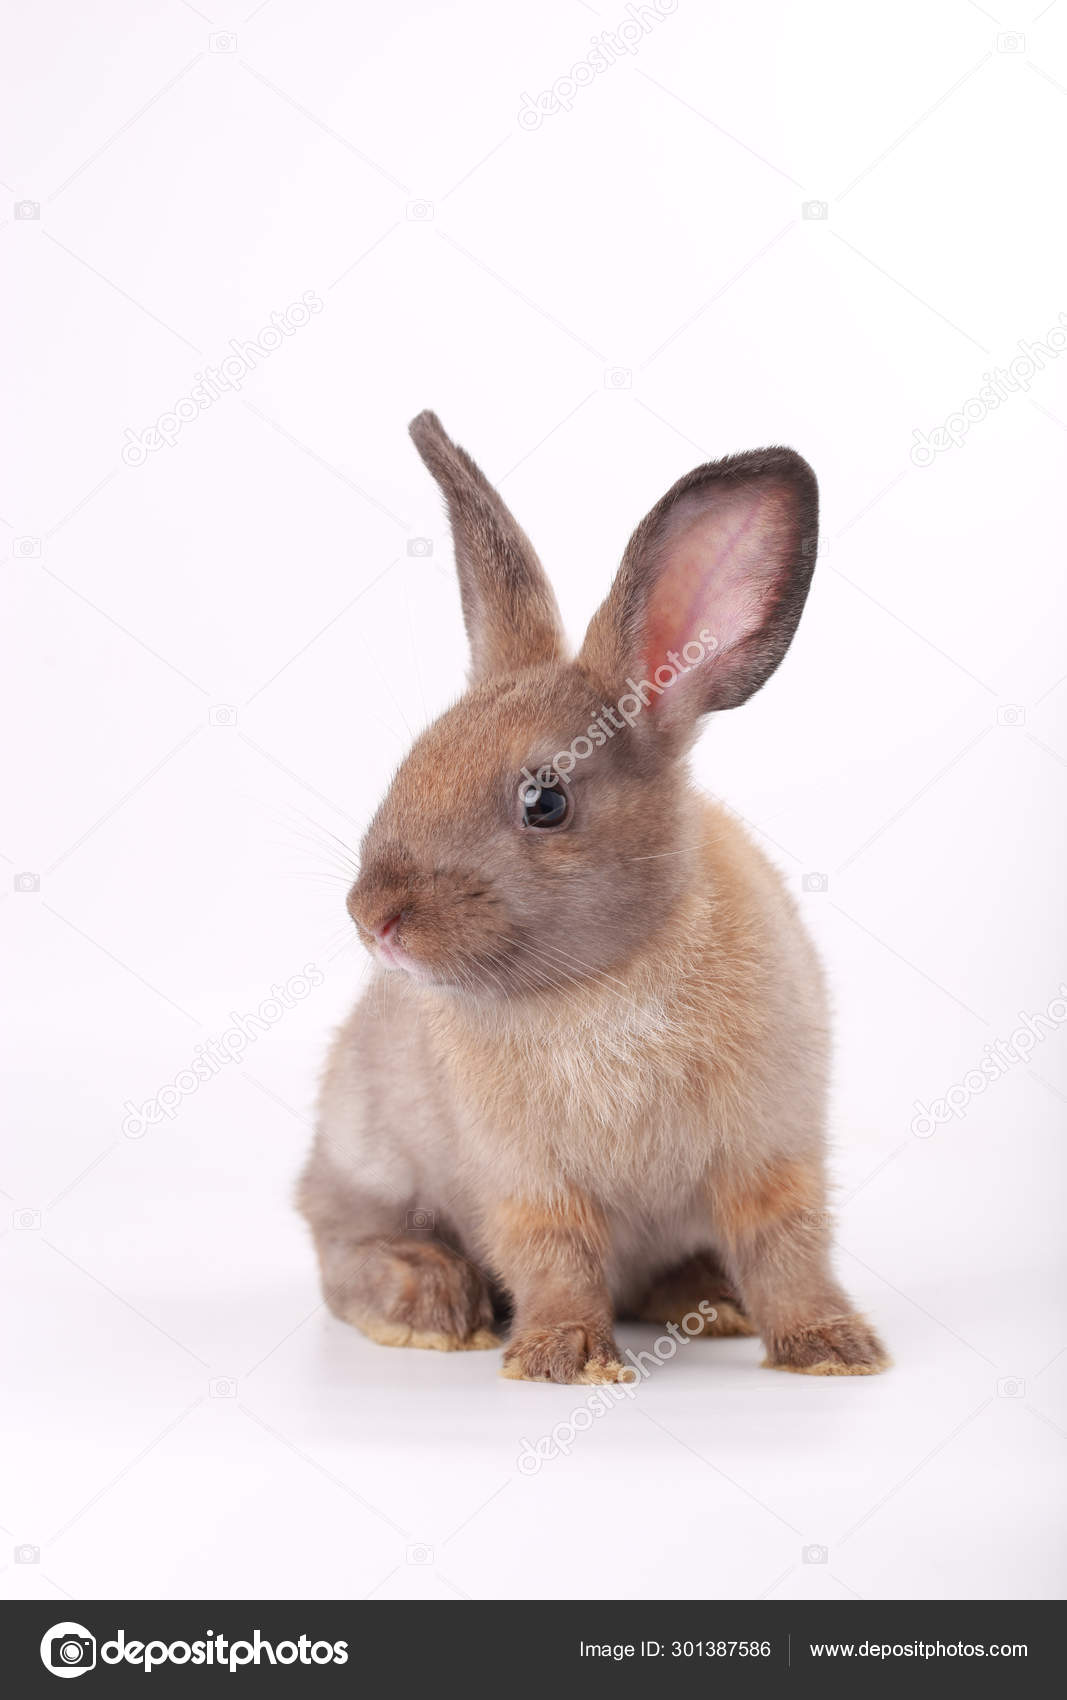 Young Little Adorable Bunny Big Eyes White Background Stock Photo by ©lynn.ku56@gmail.com  301387586